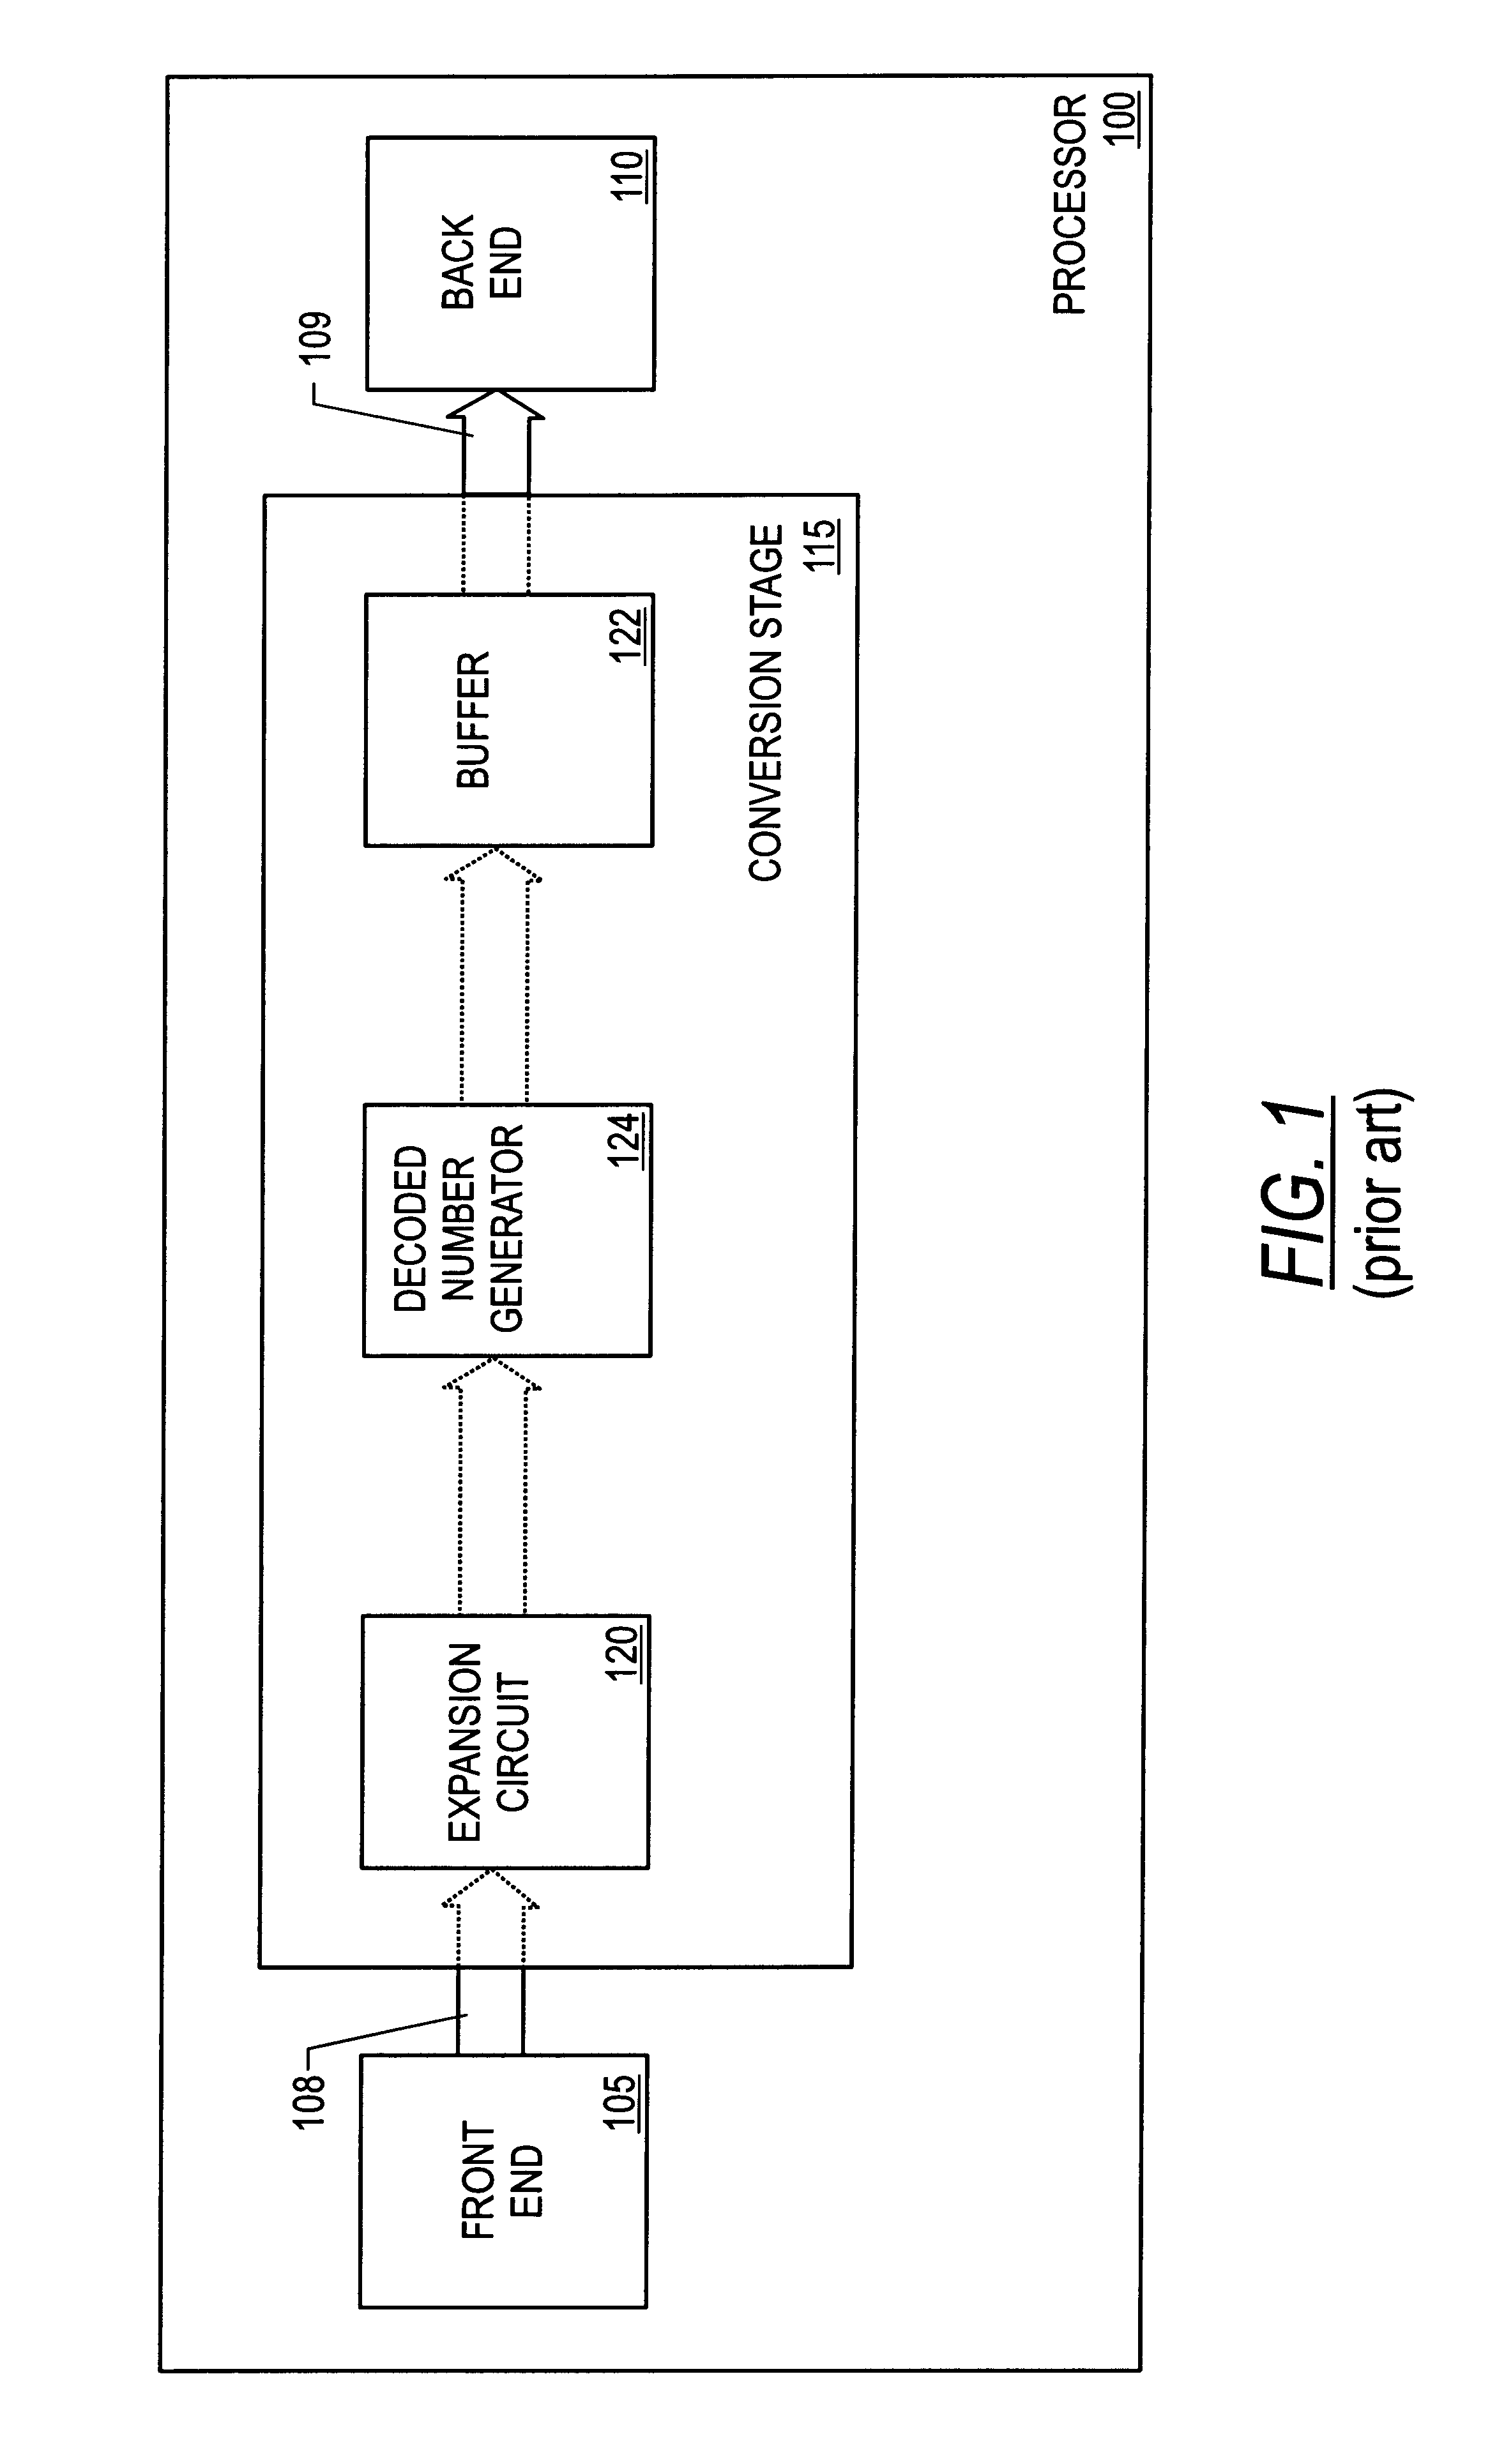 Method and apparatus for filtering valid information for downstream processing